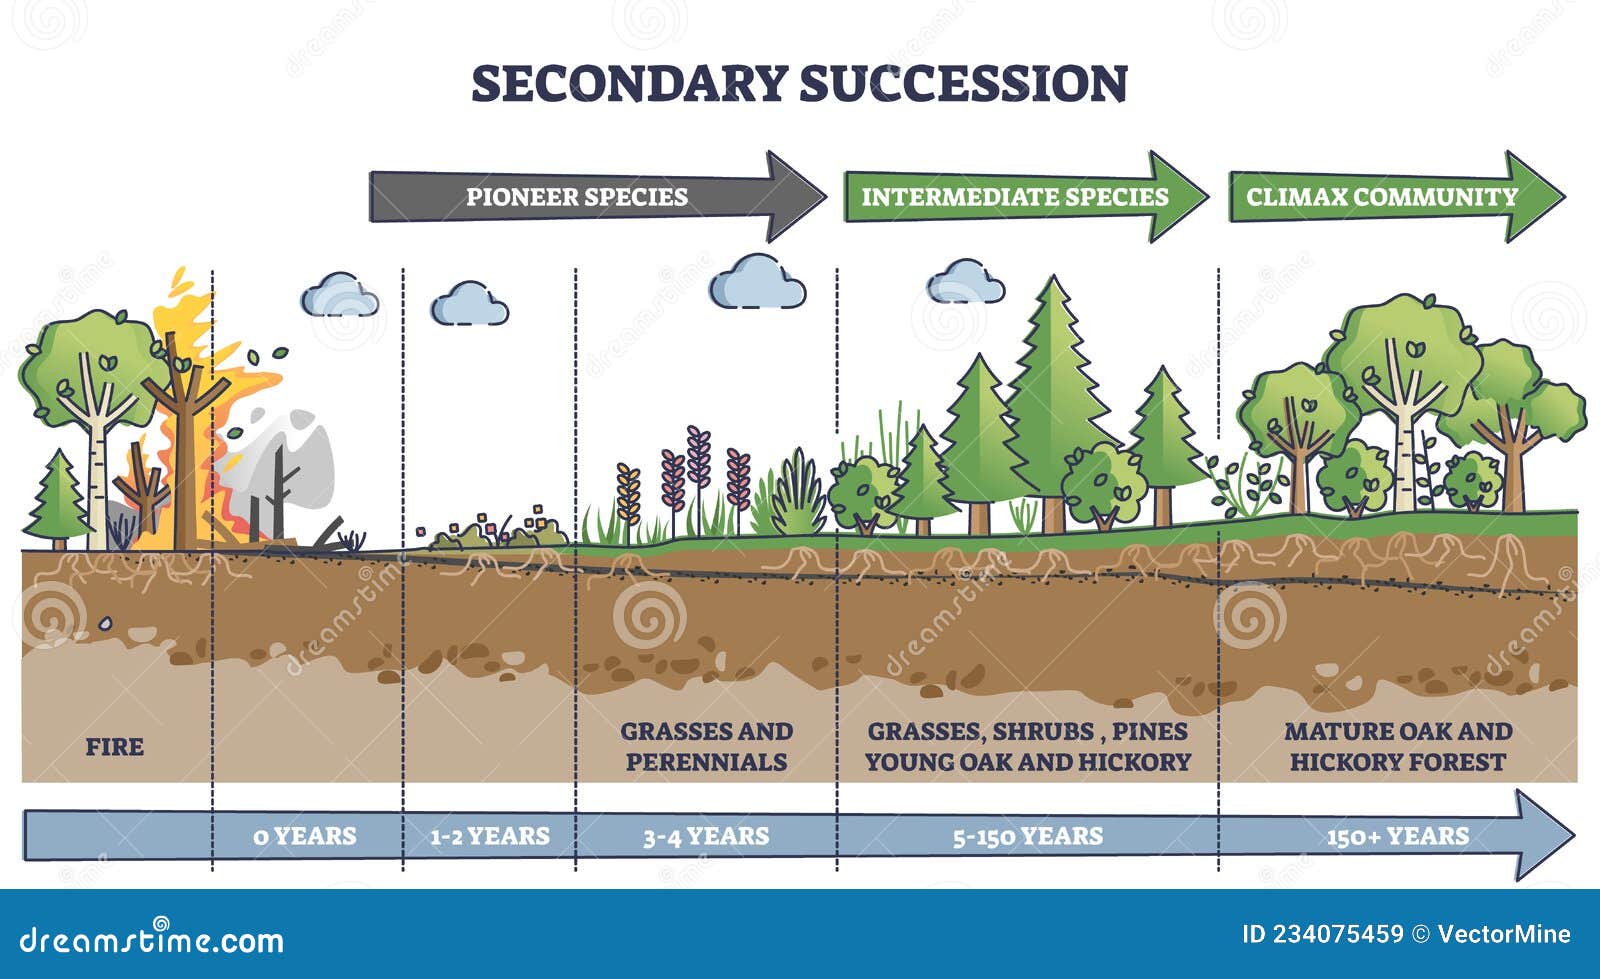 secondary succession as ecological recovery after wildfire outline diagram